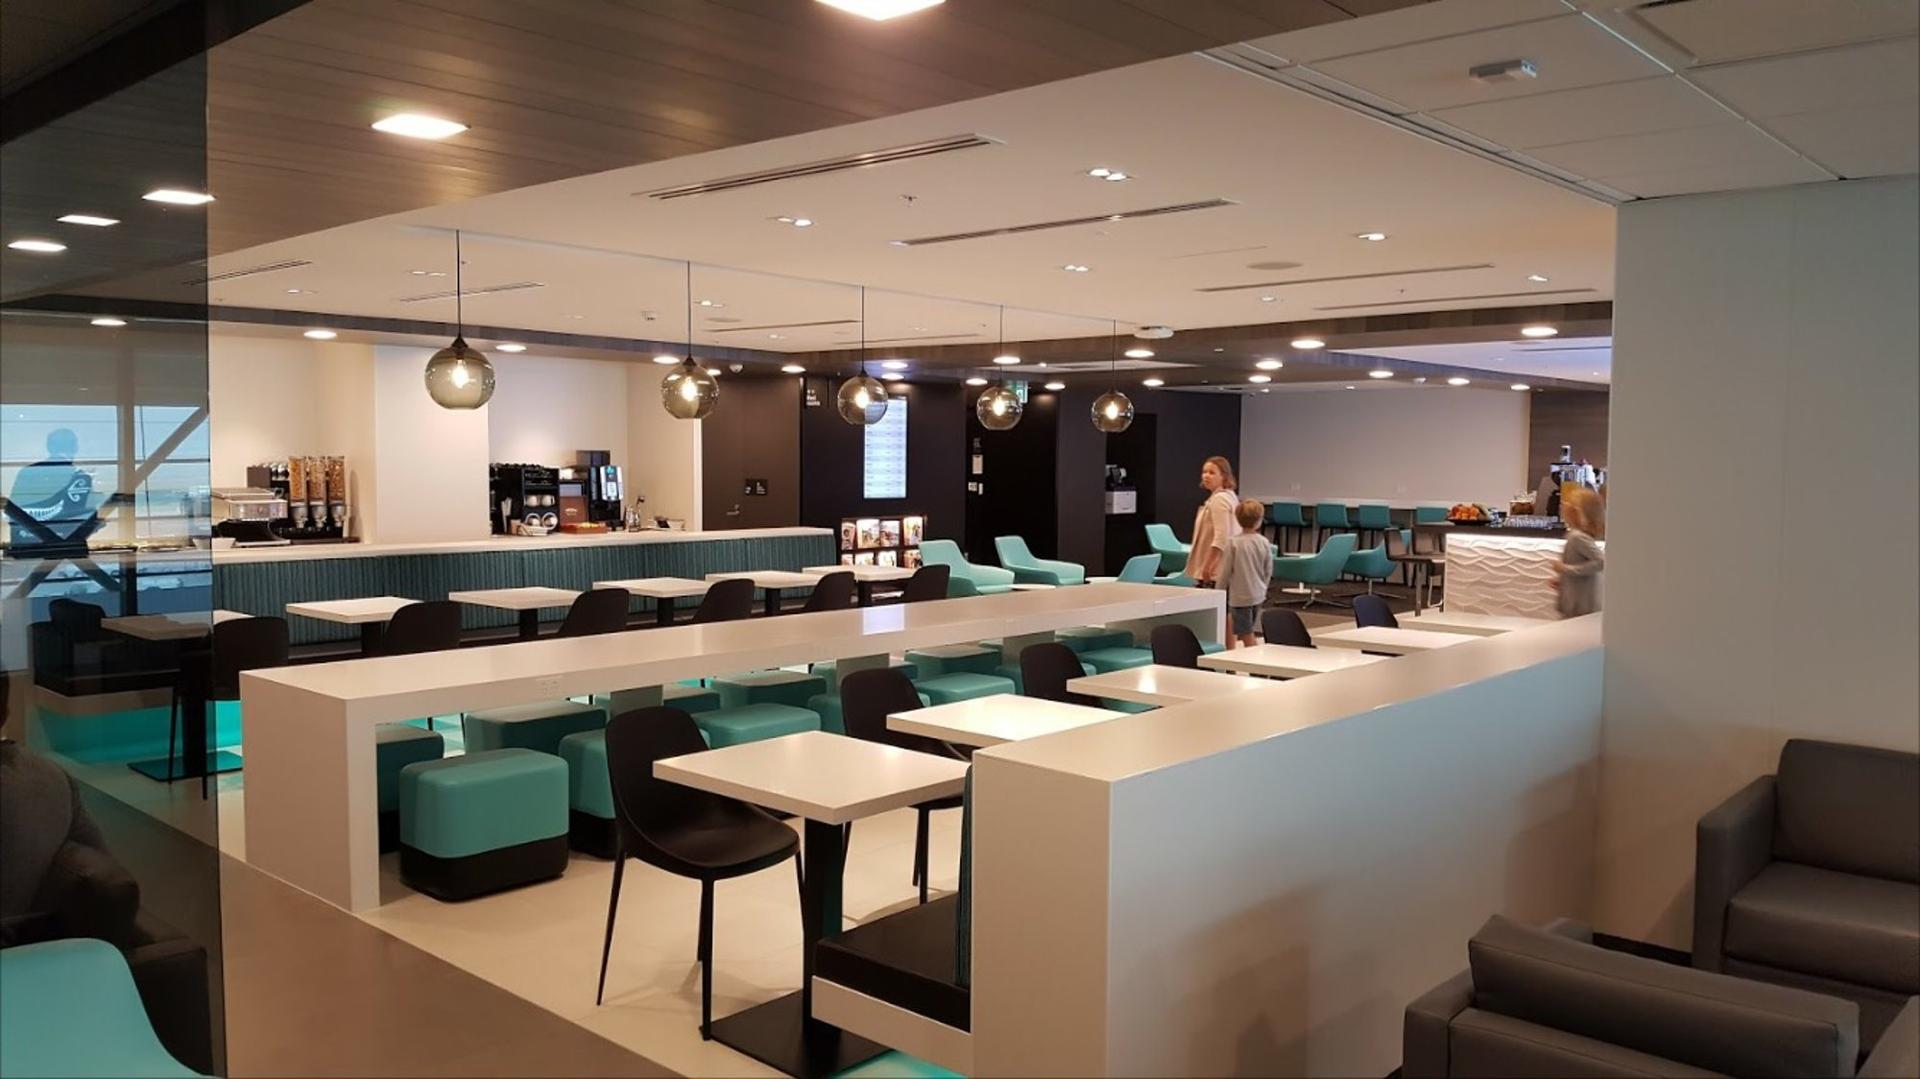 Air New Zealand Regional Lounge image 6 of 8